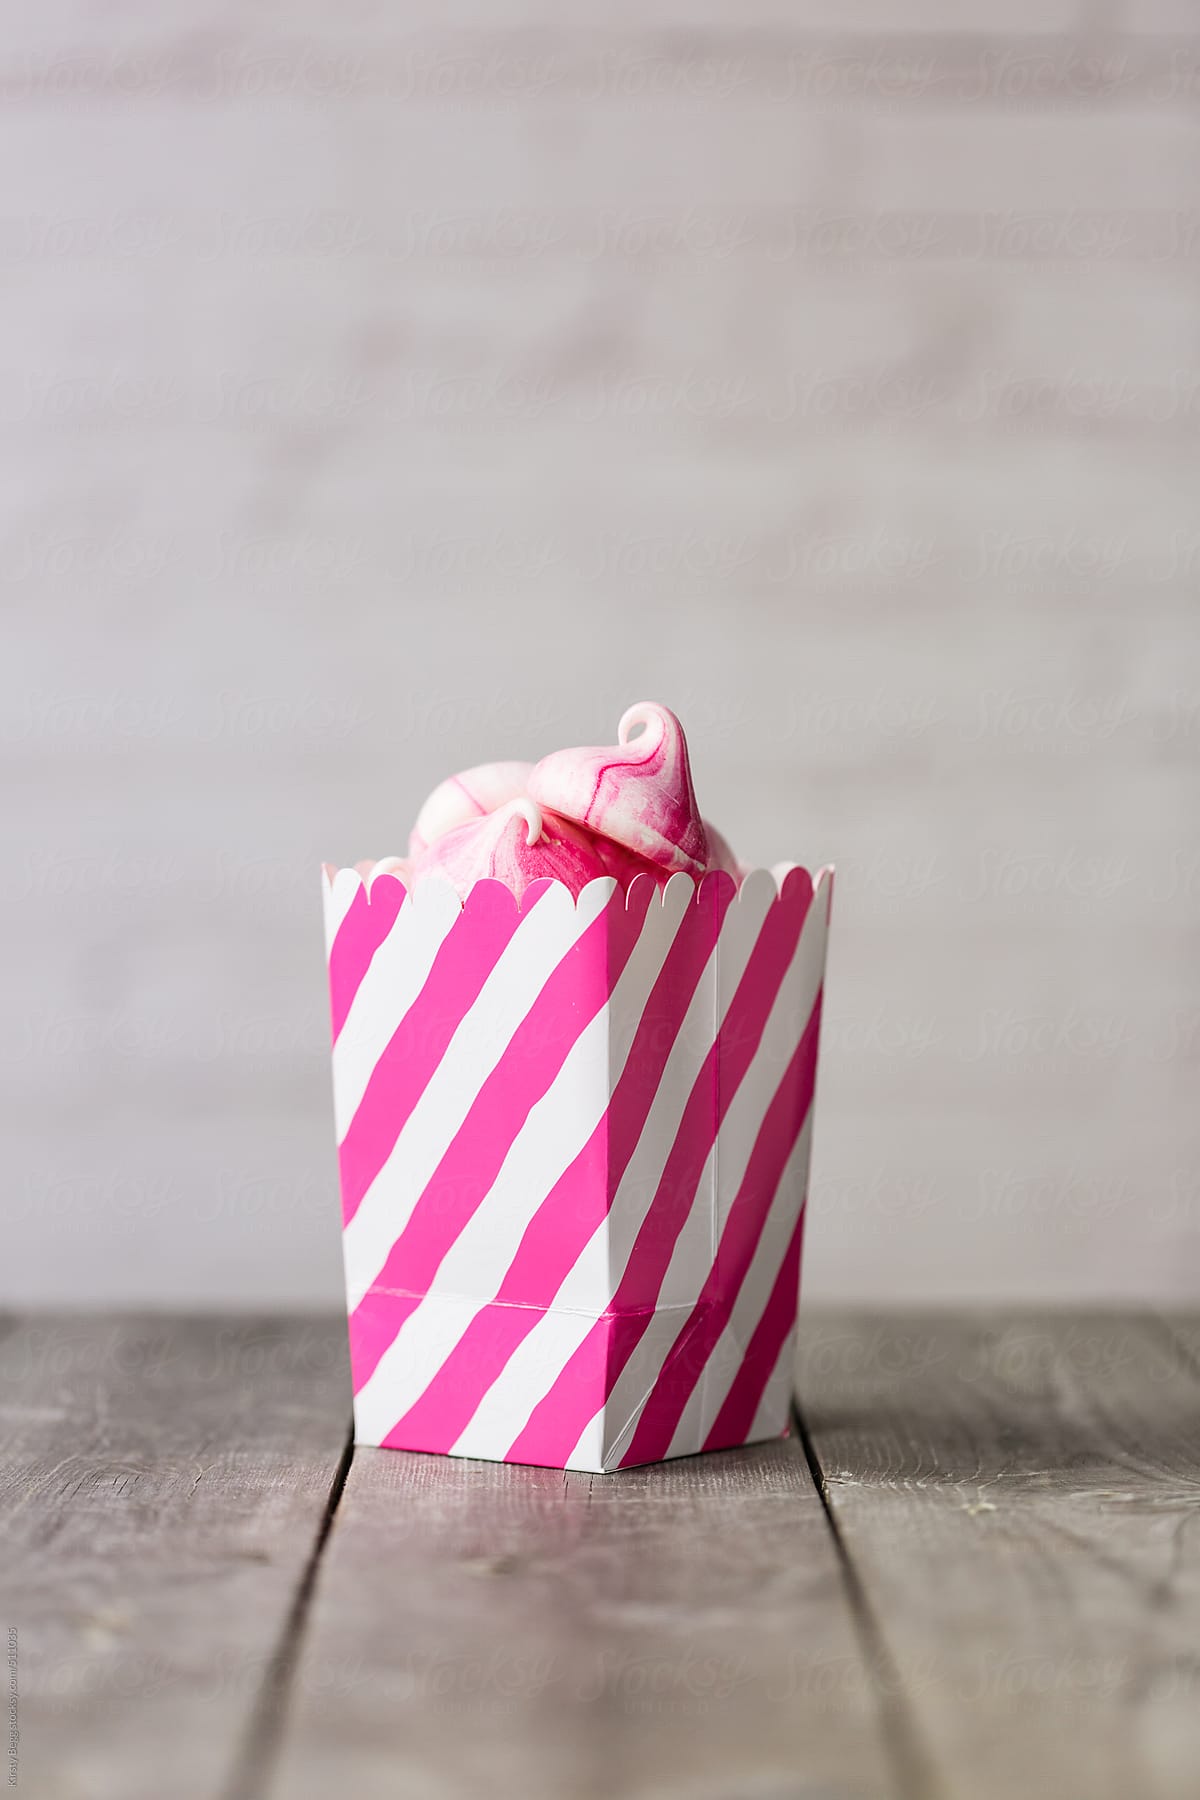 Prink striped Meringue Kisses in pink and white treat box